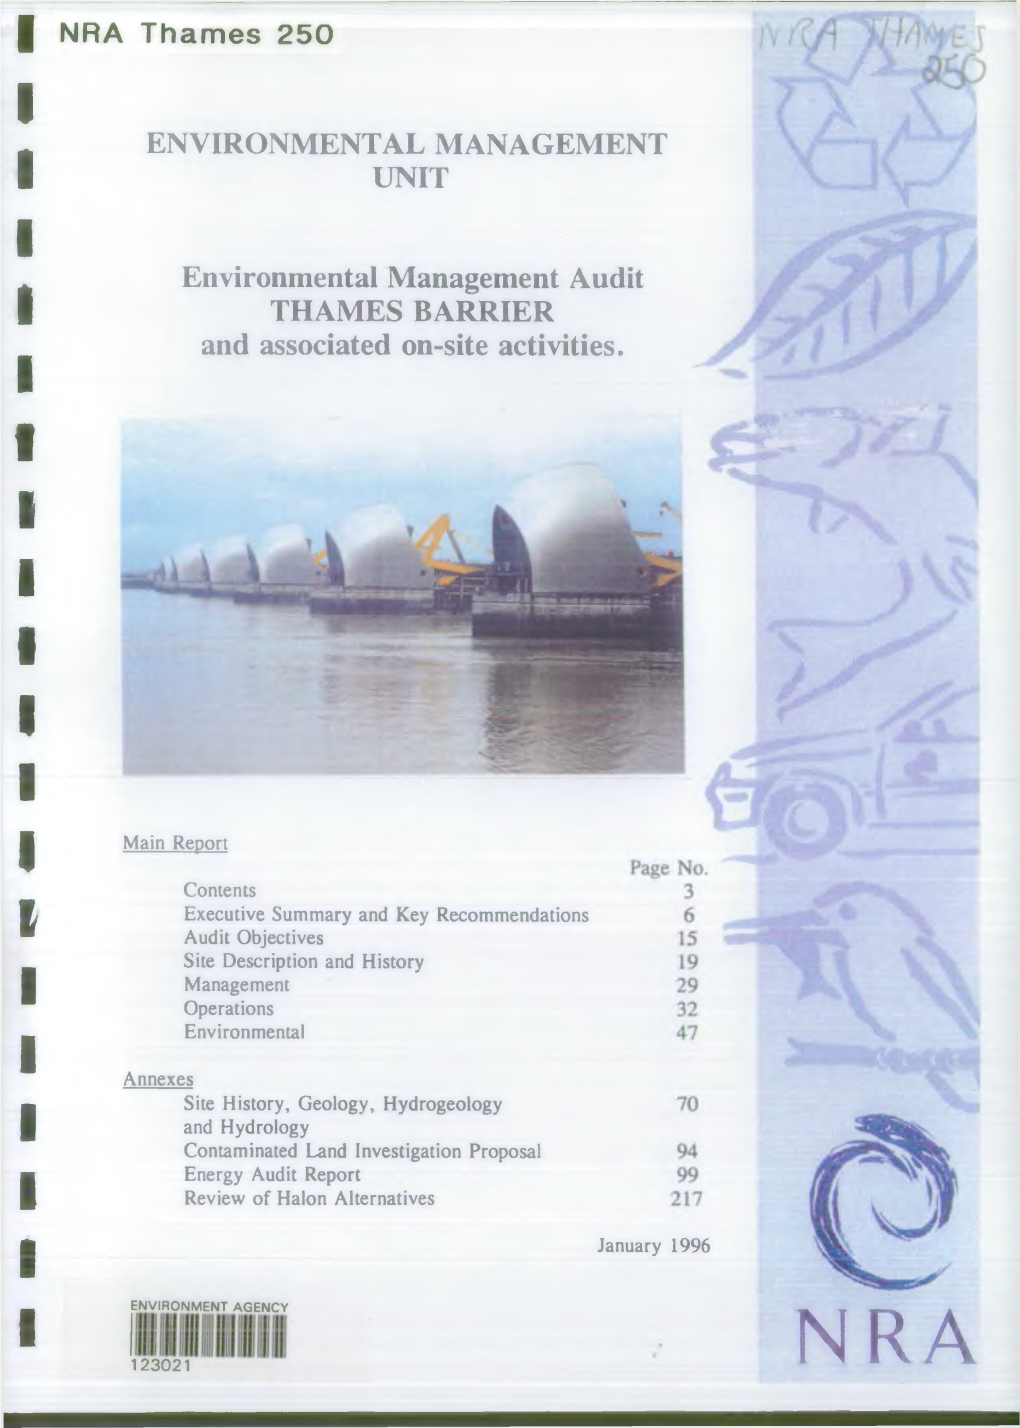 ENVIRONMENTAL MANAGEMENT UNIT Environmental Management Audit THAMES BARRIER and Associated On-Site Activities